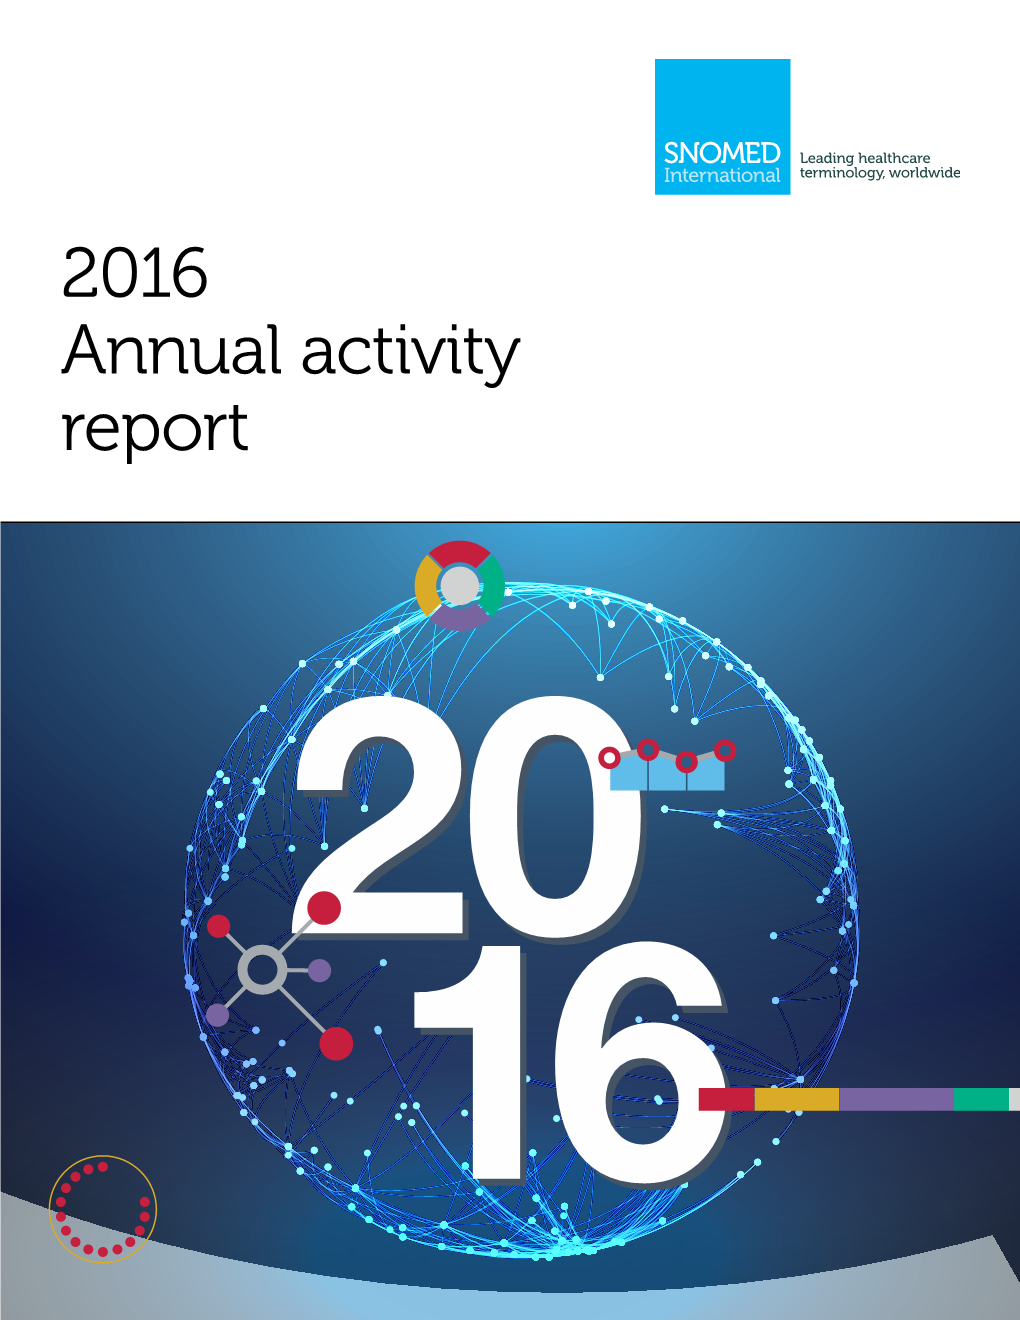 2016 Annual Activity Report 2200 1166 Table of CONTENTS